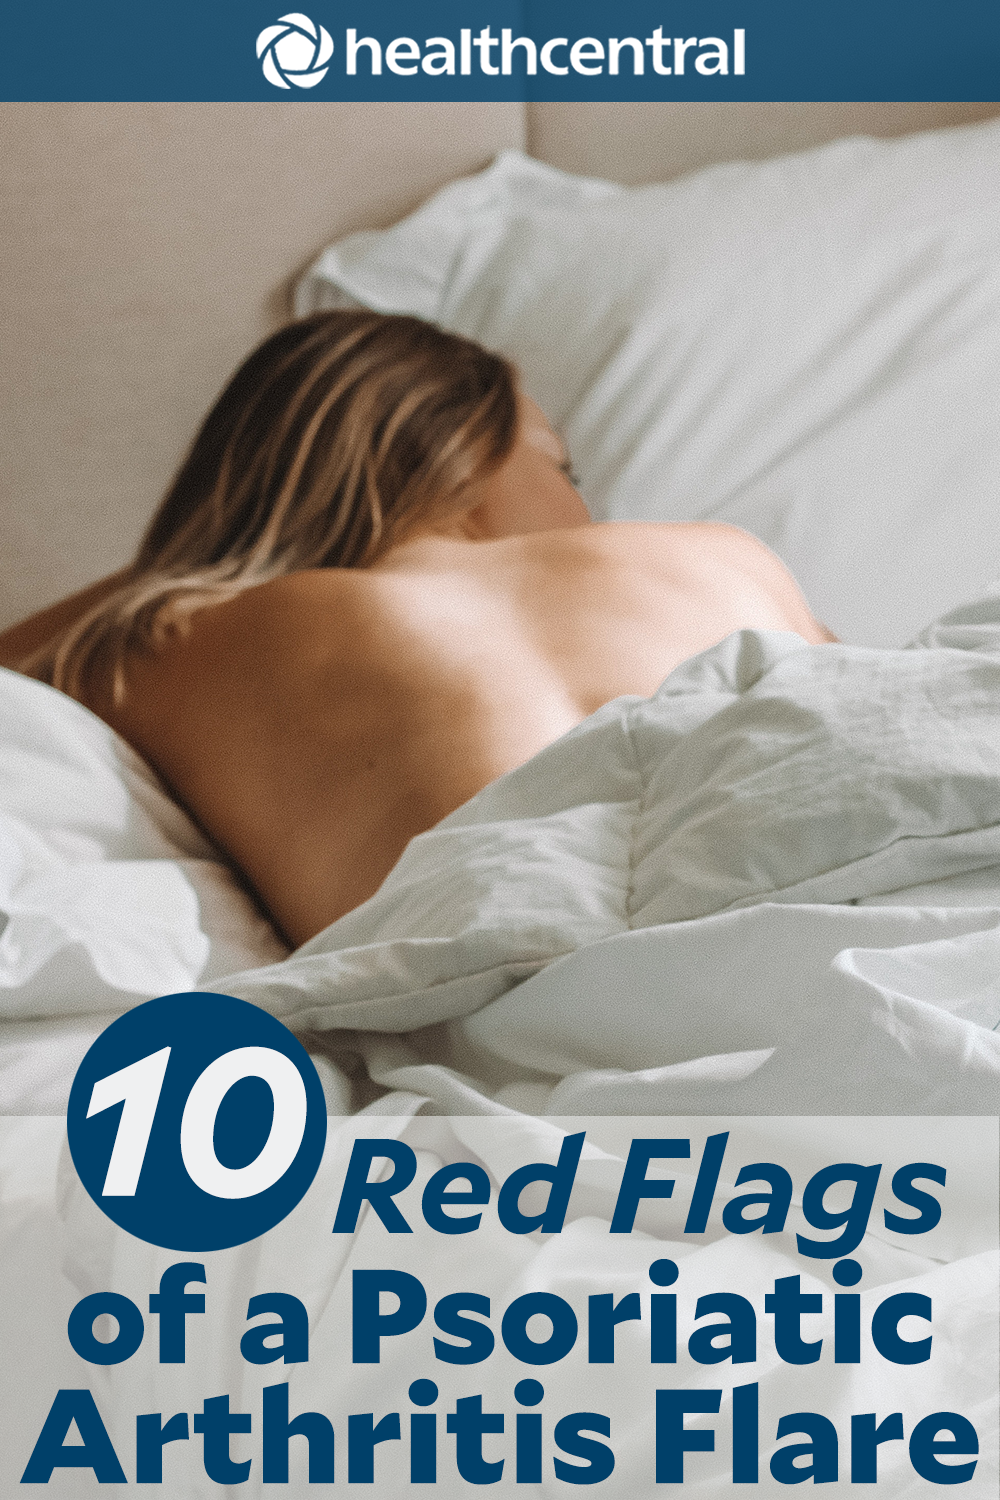 Red Flags of a Psoriatic Arthritis Flare